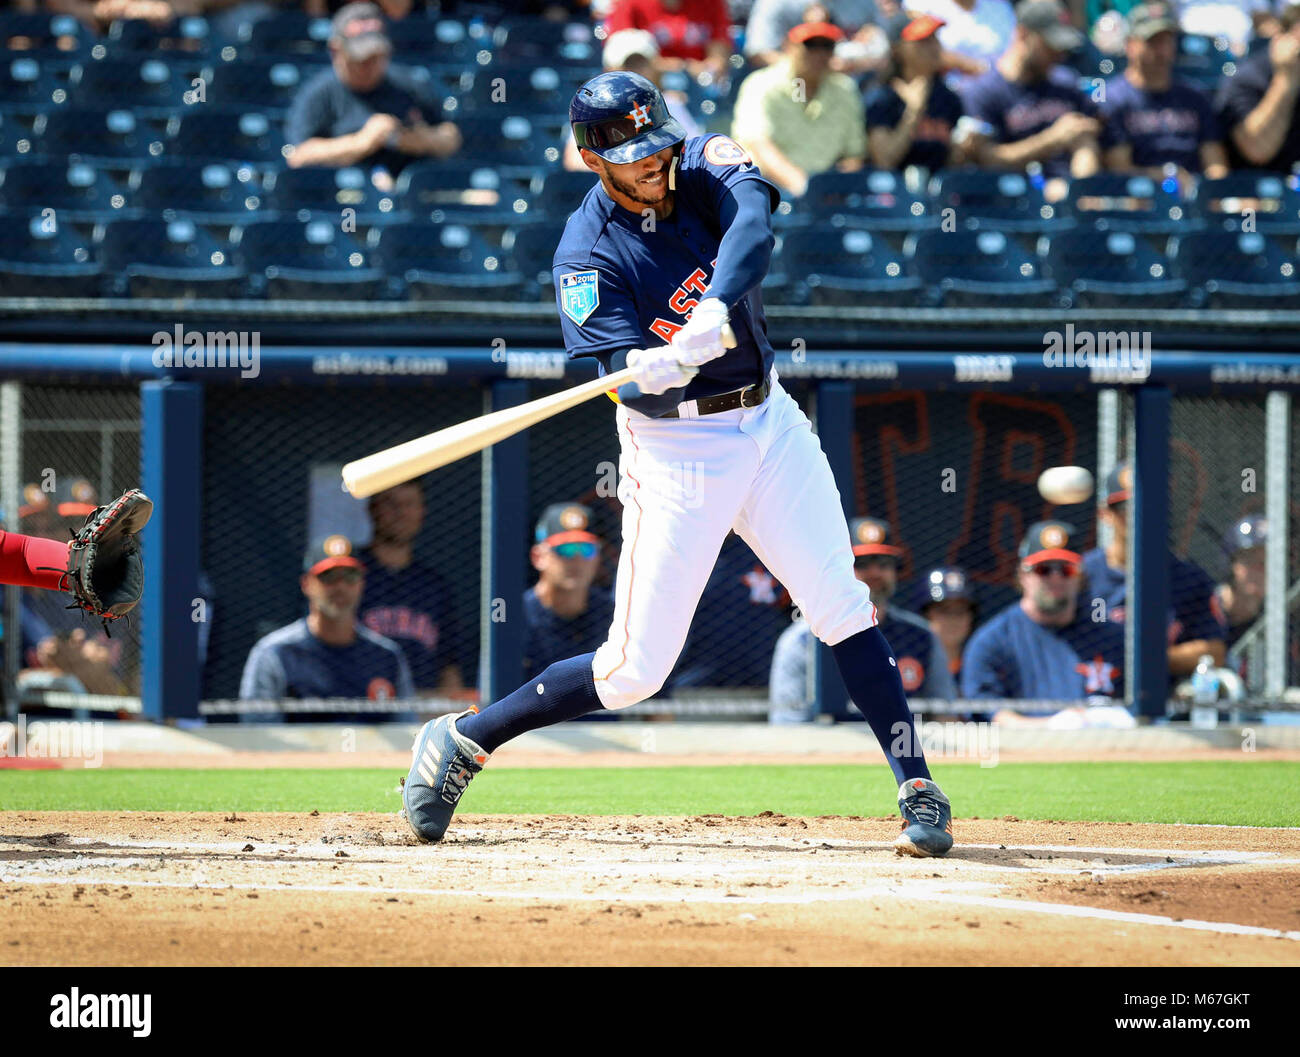 Florida, USA. 1st Mar, 2018. Houston Astros' #1 Carlos Correa swings at a pitch during a spring training game between the Houston Astros and Boston Red Sox at the Ballpark of the Palm Beaches Thursday, March 1, 2018. Credit: Bruce R. Bennett/The Palm Beach Post/ZUMA Wire/Alamy Live News Stock Photo